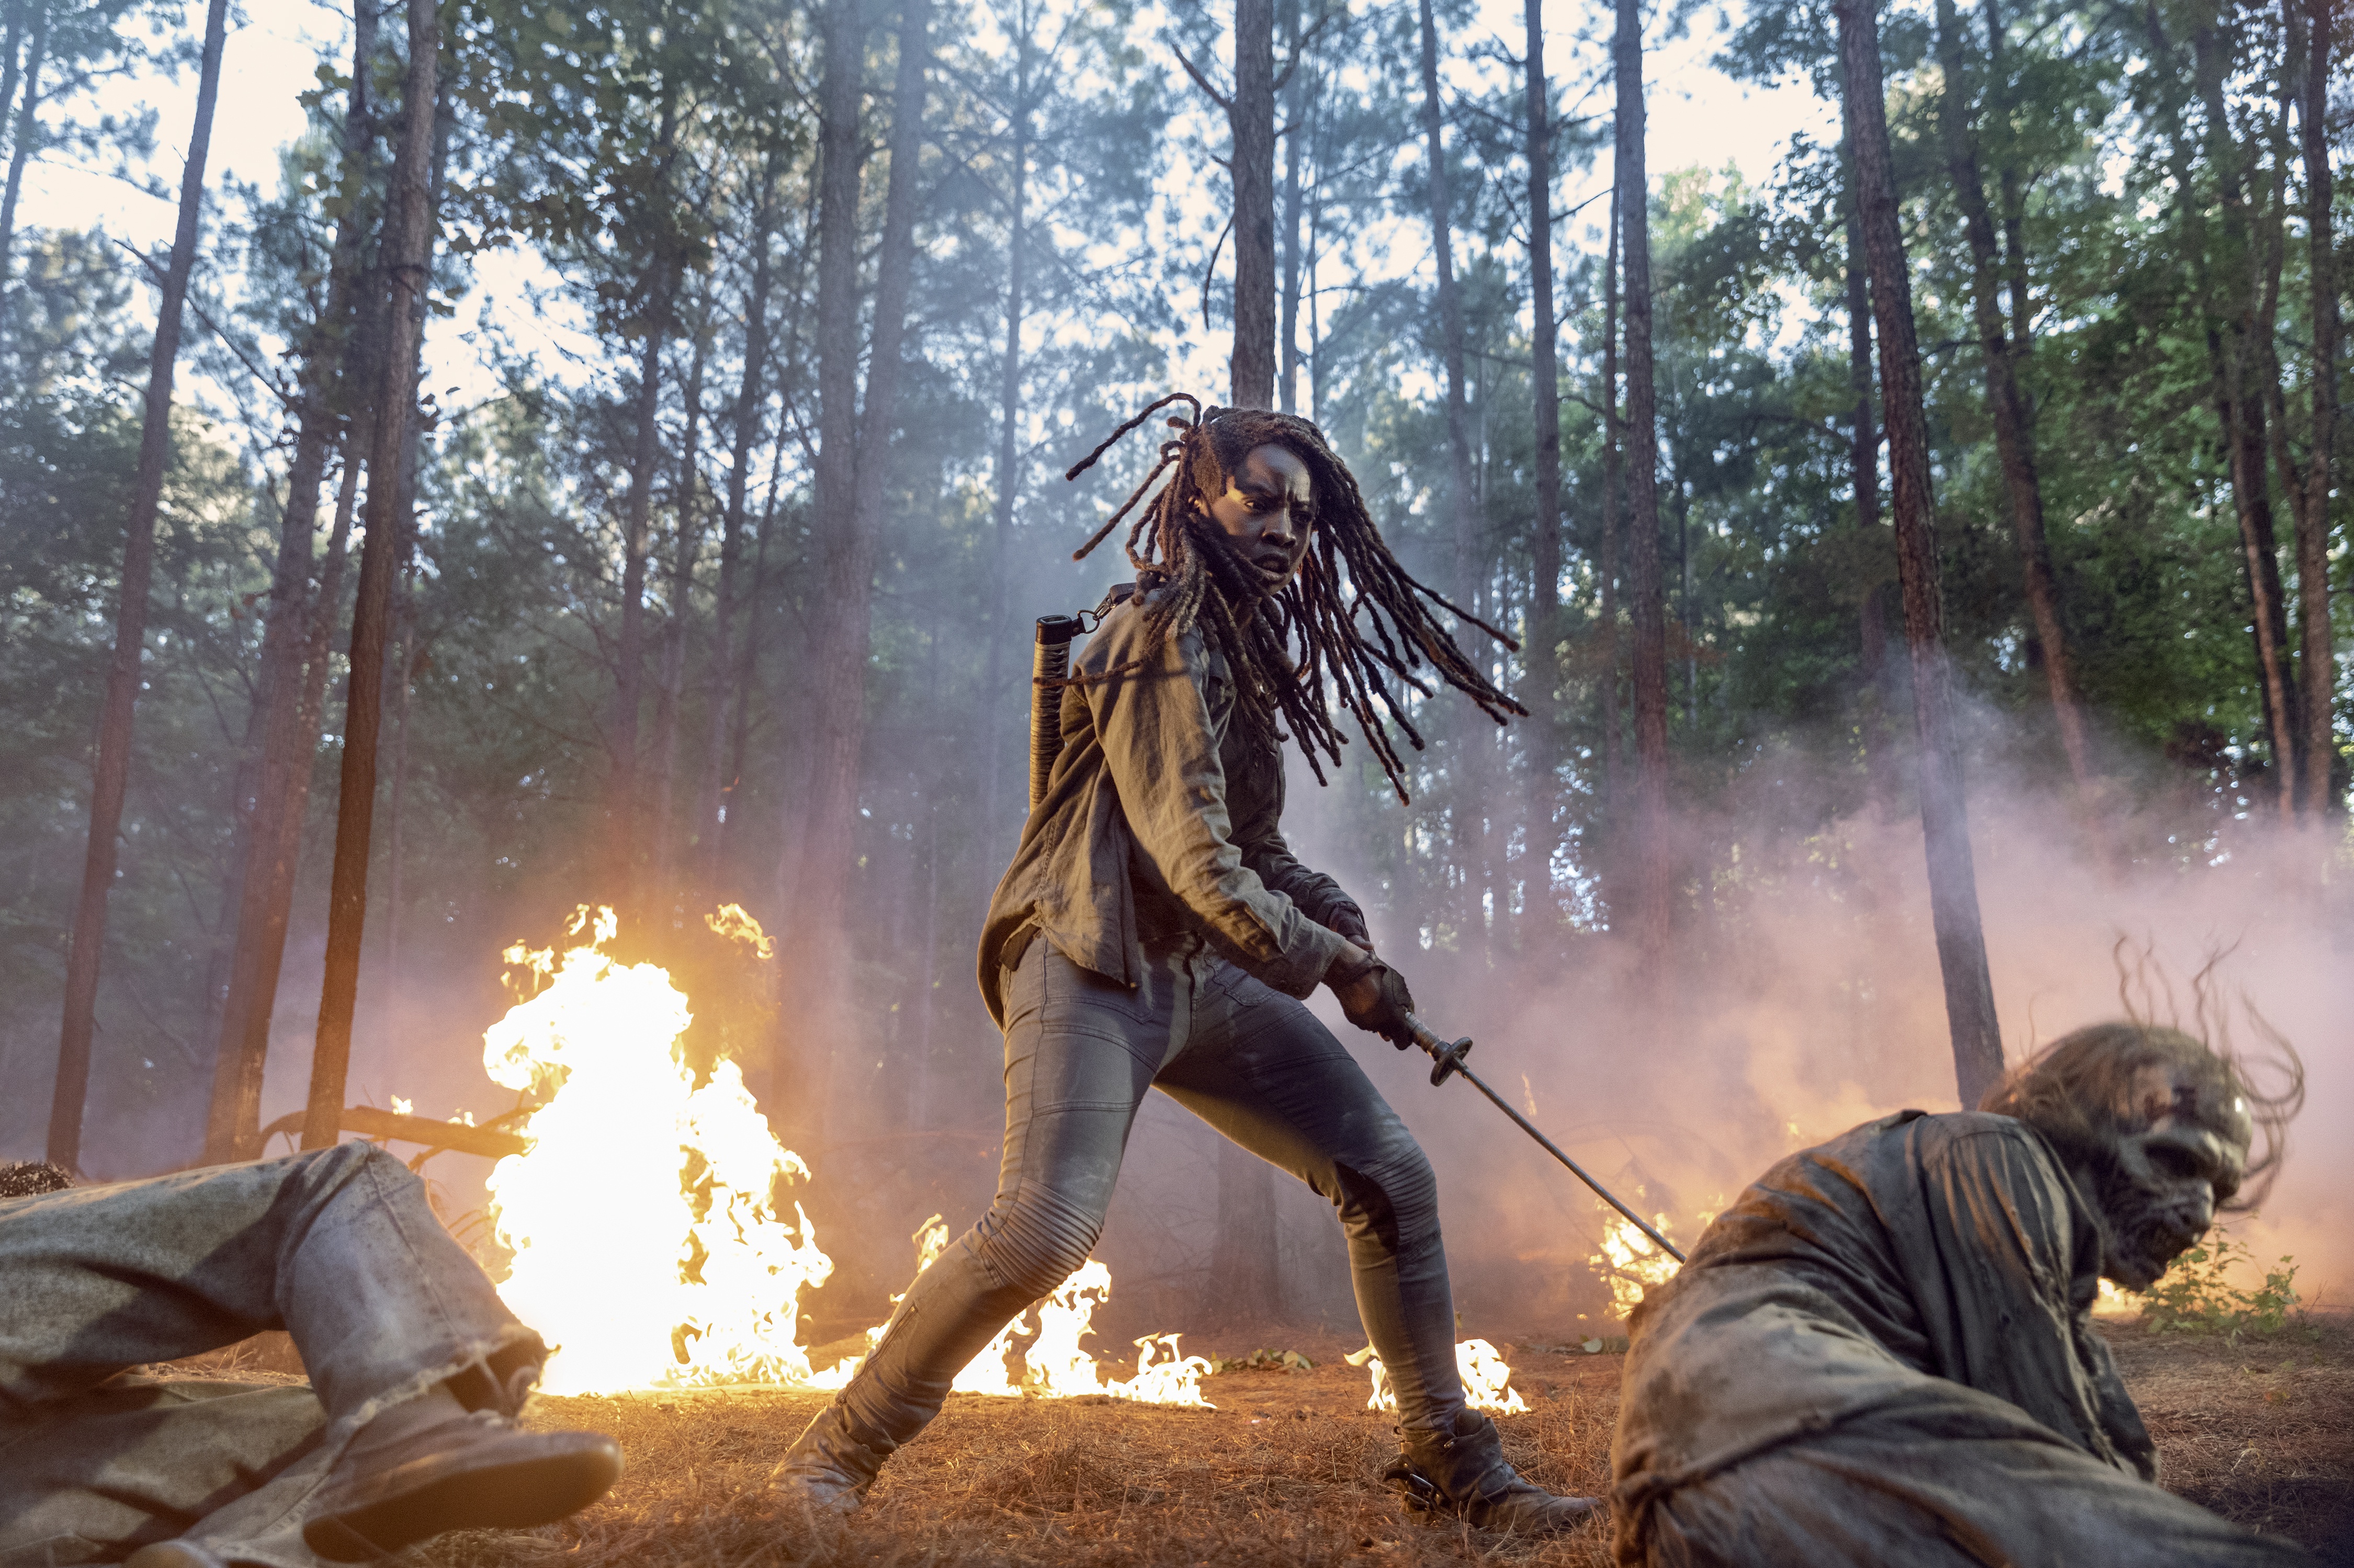 Love AMC’s ‘The Walking Dead’? Audition for These Horror Gigs